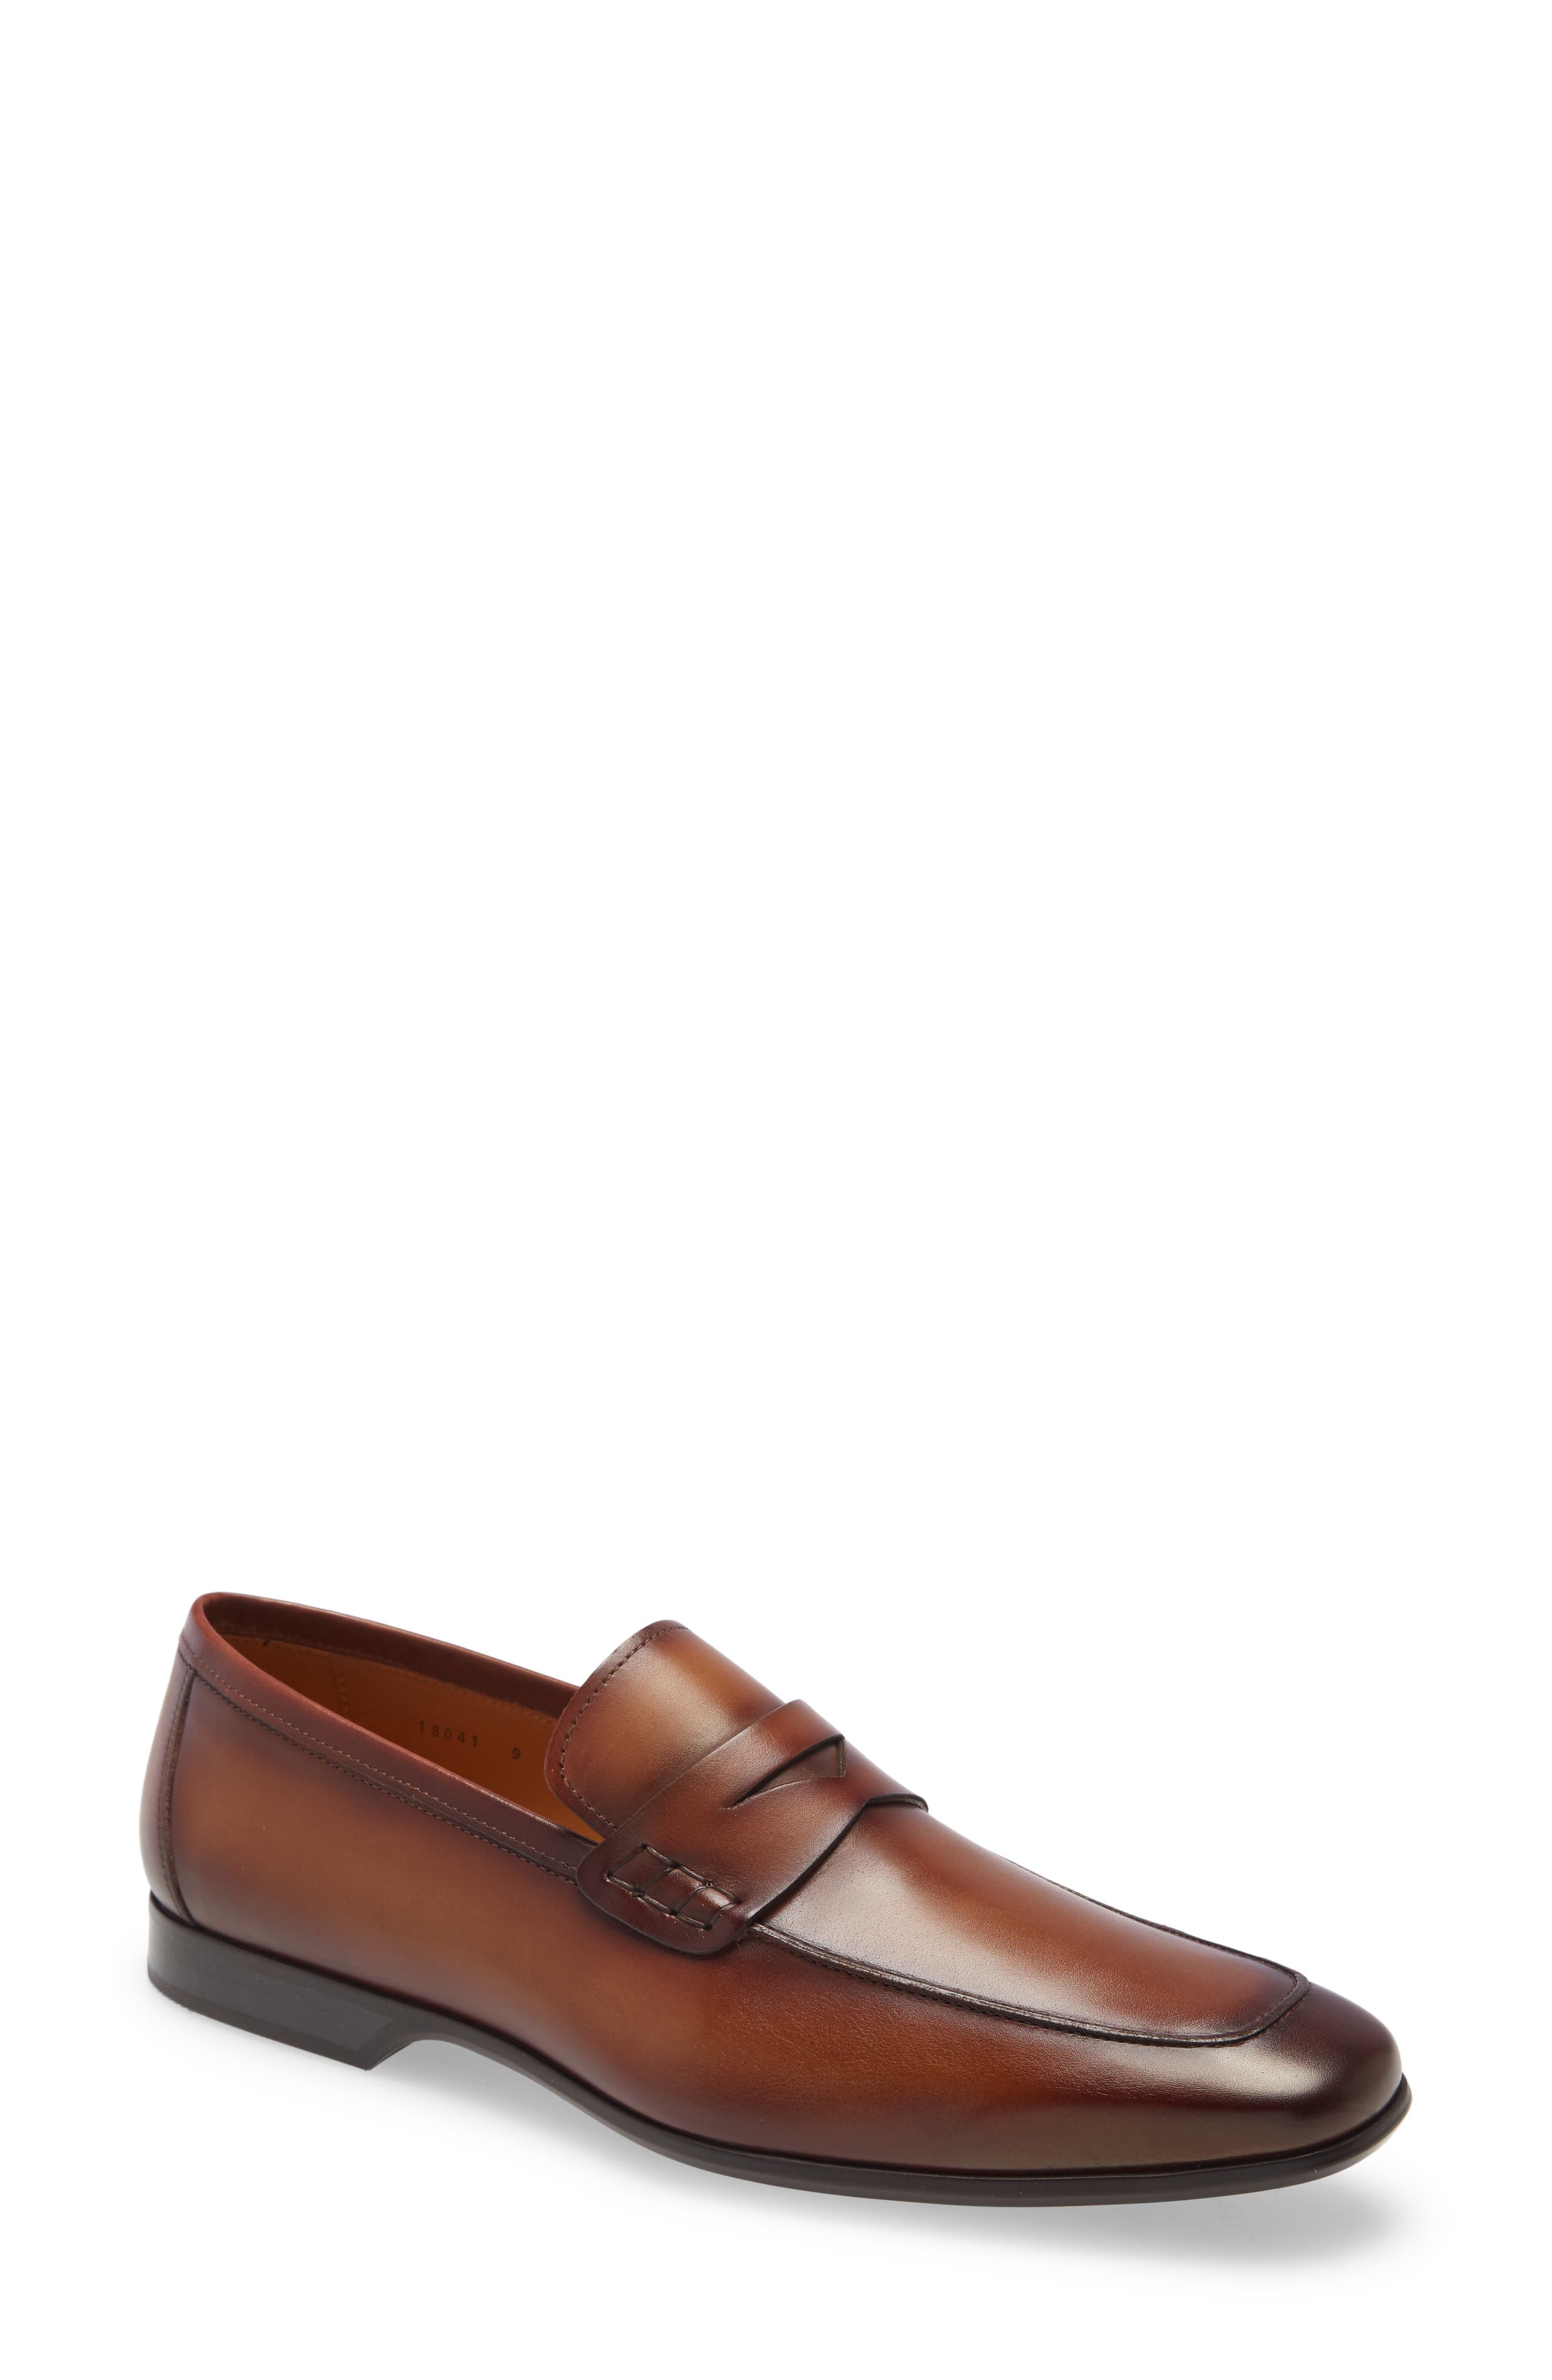 magnanni mens loafers